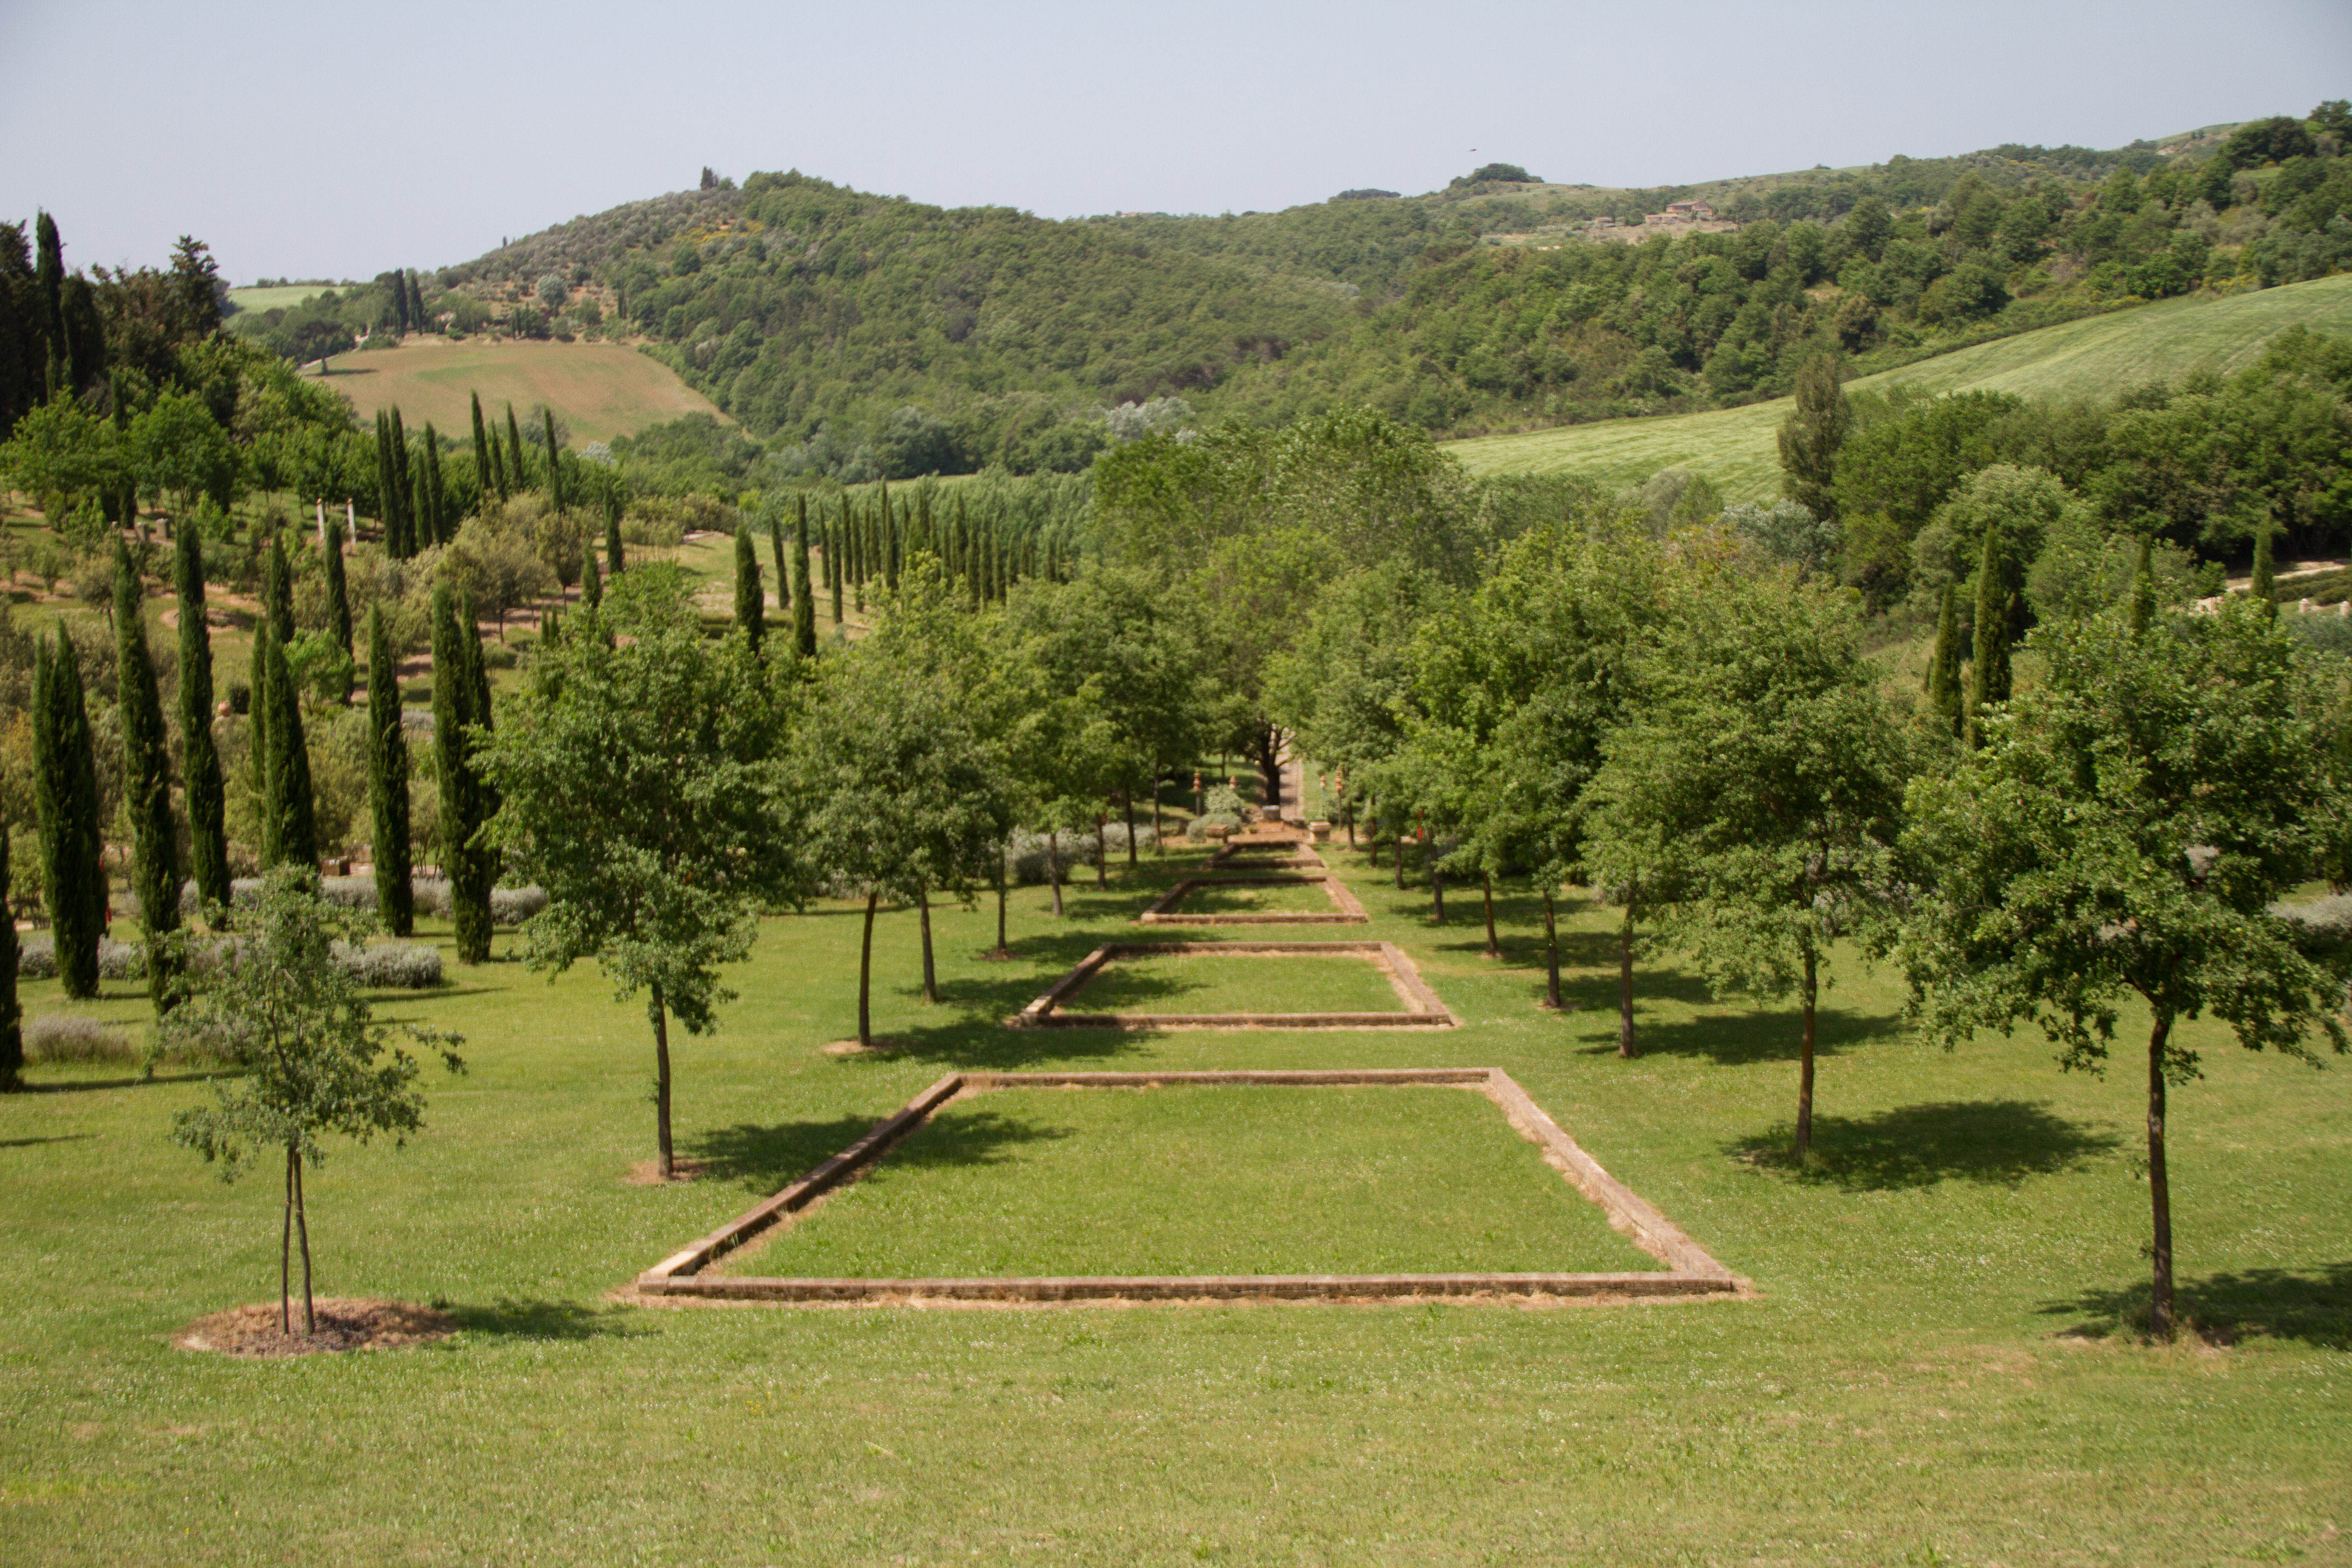 This overview of the sunny side of Bosco della Ragnaia illustrates how the garden maker has played with perspective and historic precedence.